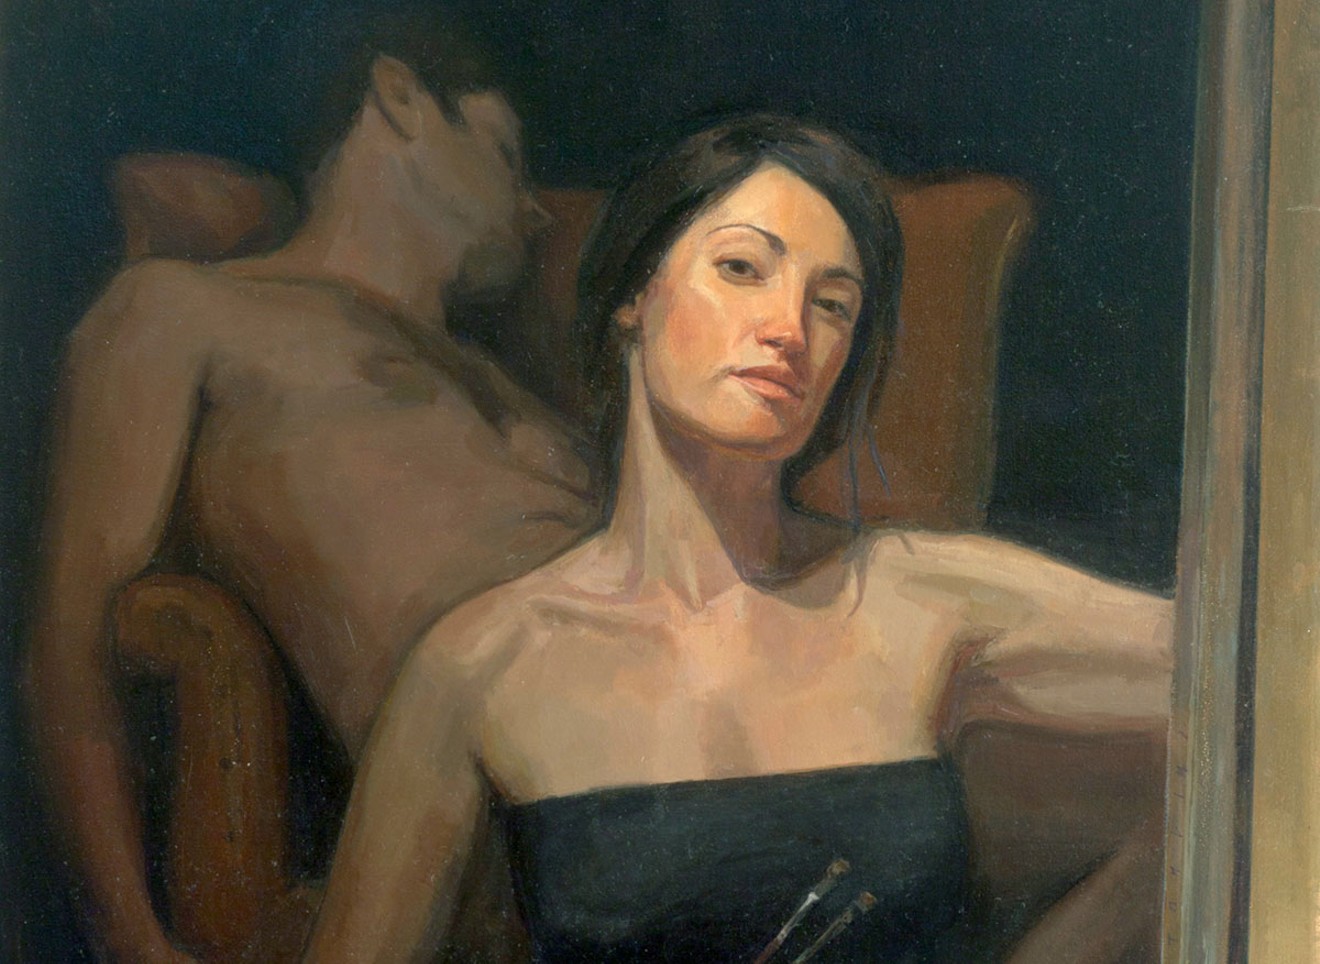 Self Portrait with a Man (detail) by Rachel Constantine, on view in "Women Painting Women: In Earnest," a traveling museum exhibition.